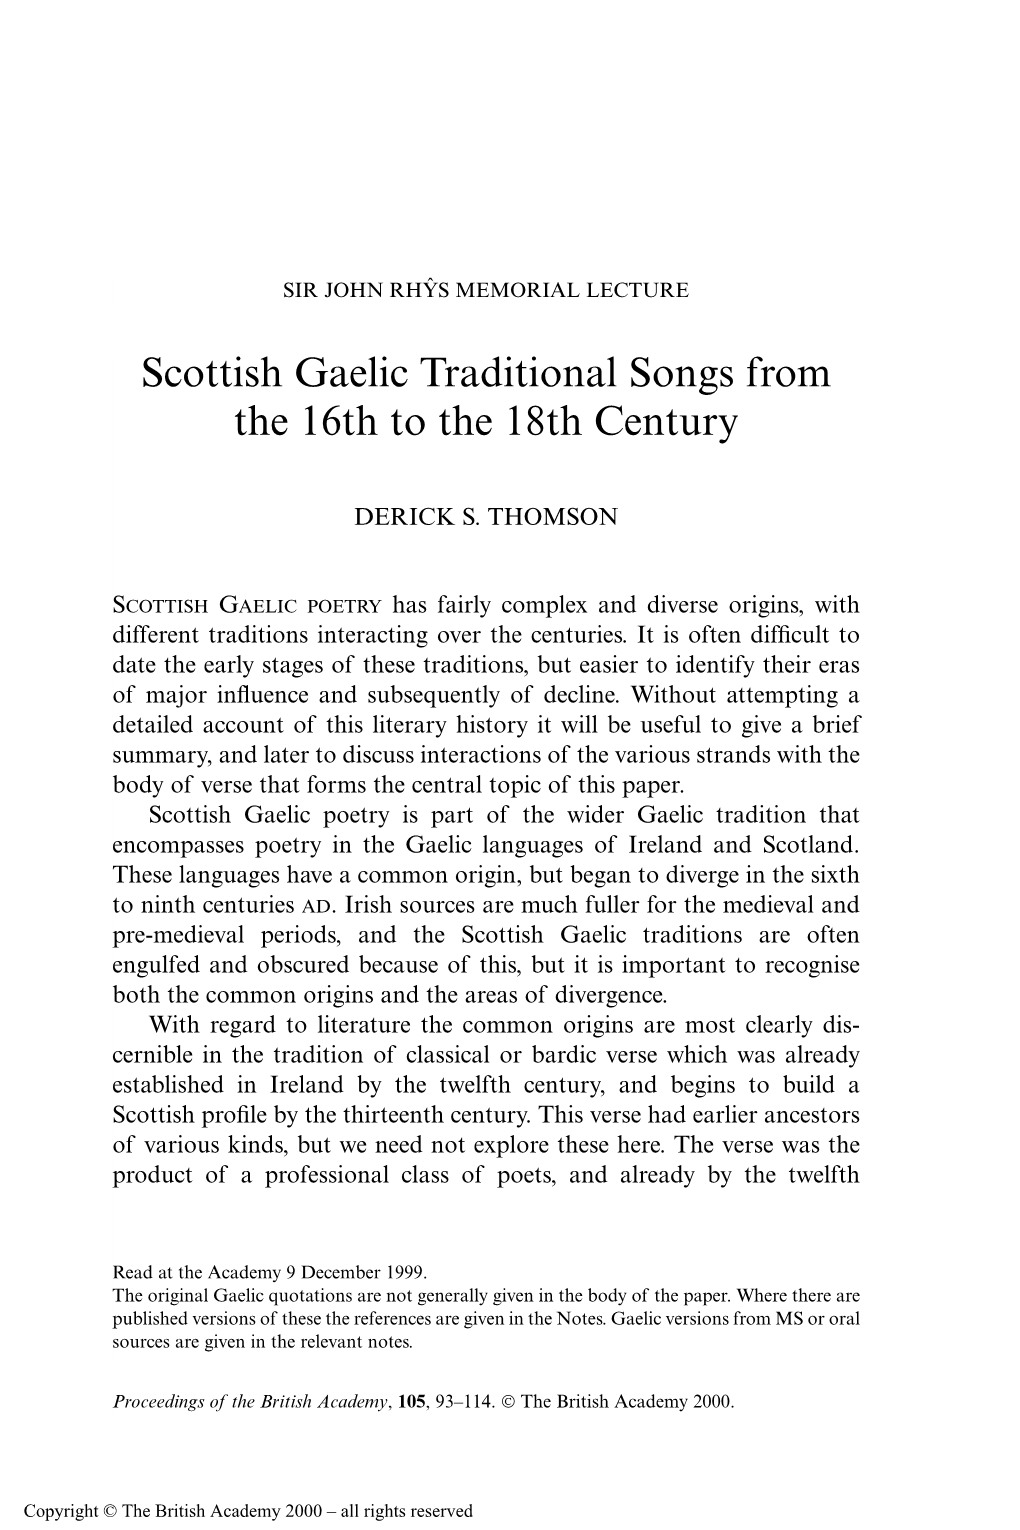 Scottish Gaelic Traditional Songs from the 16Th to the 18Th Century